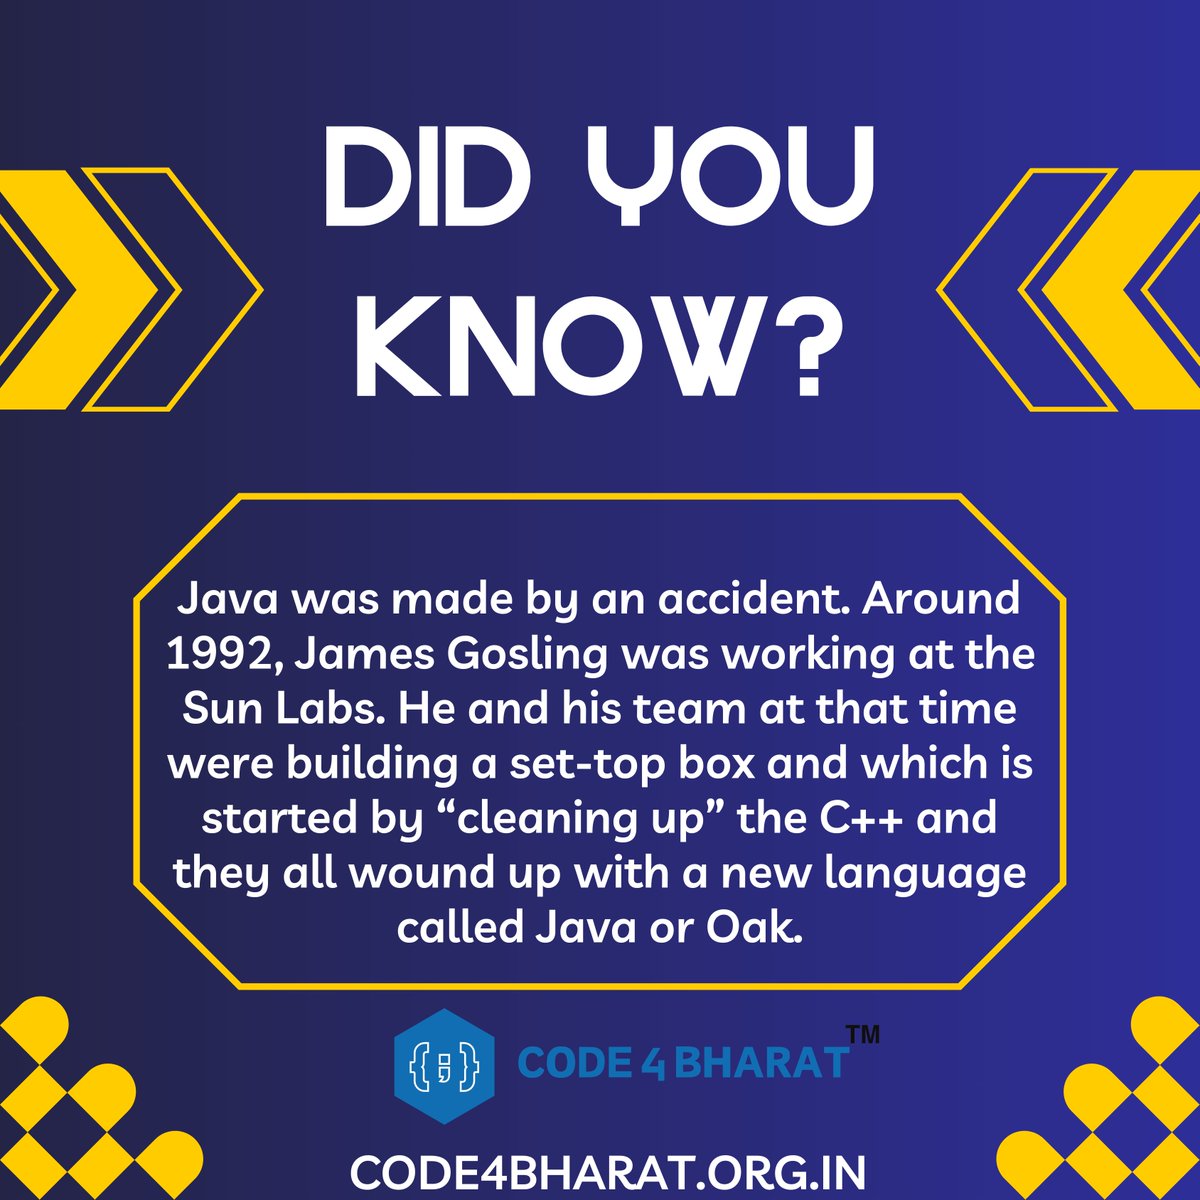 'Ever wondered how Java came to be? In 1992, James Gosling and team accidentally birthed Java while 'cleaning up' C++. From mishap to powerhouse, it's now a programming legend! 💻✨ #Java #ProgrammingTrivia #TechHistory #Innovation'